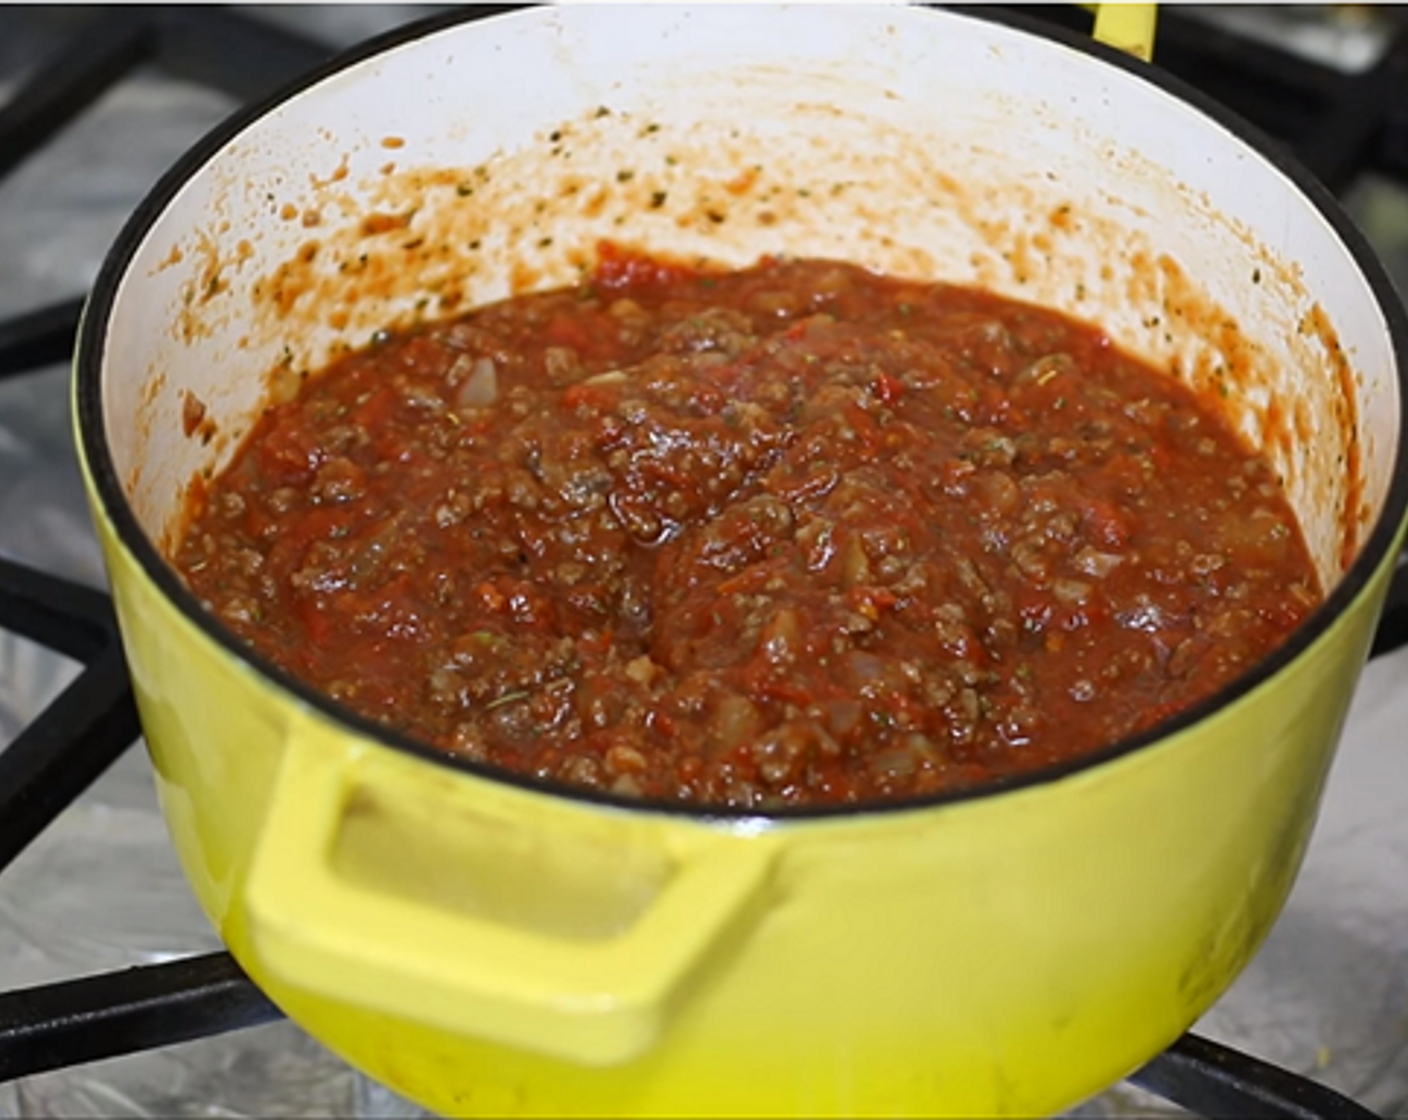 step 2 Stir in Canned Crushed Tomatoes (3 1/3 cups), Italian Seasoning (1 Tbsp), and season with Salt (to taste) and Ground Black Pepper (to taste). Mix until well combined, cover and simmer on low heat while you prepare the cheese mixture.